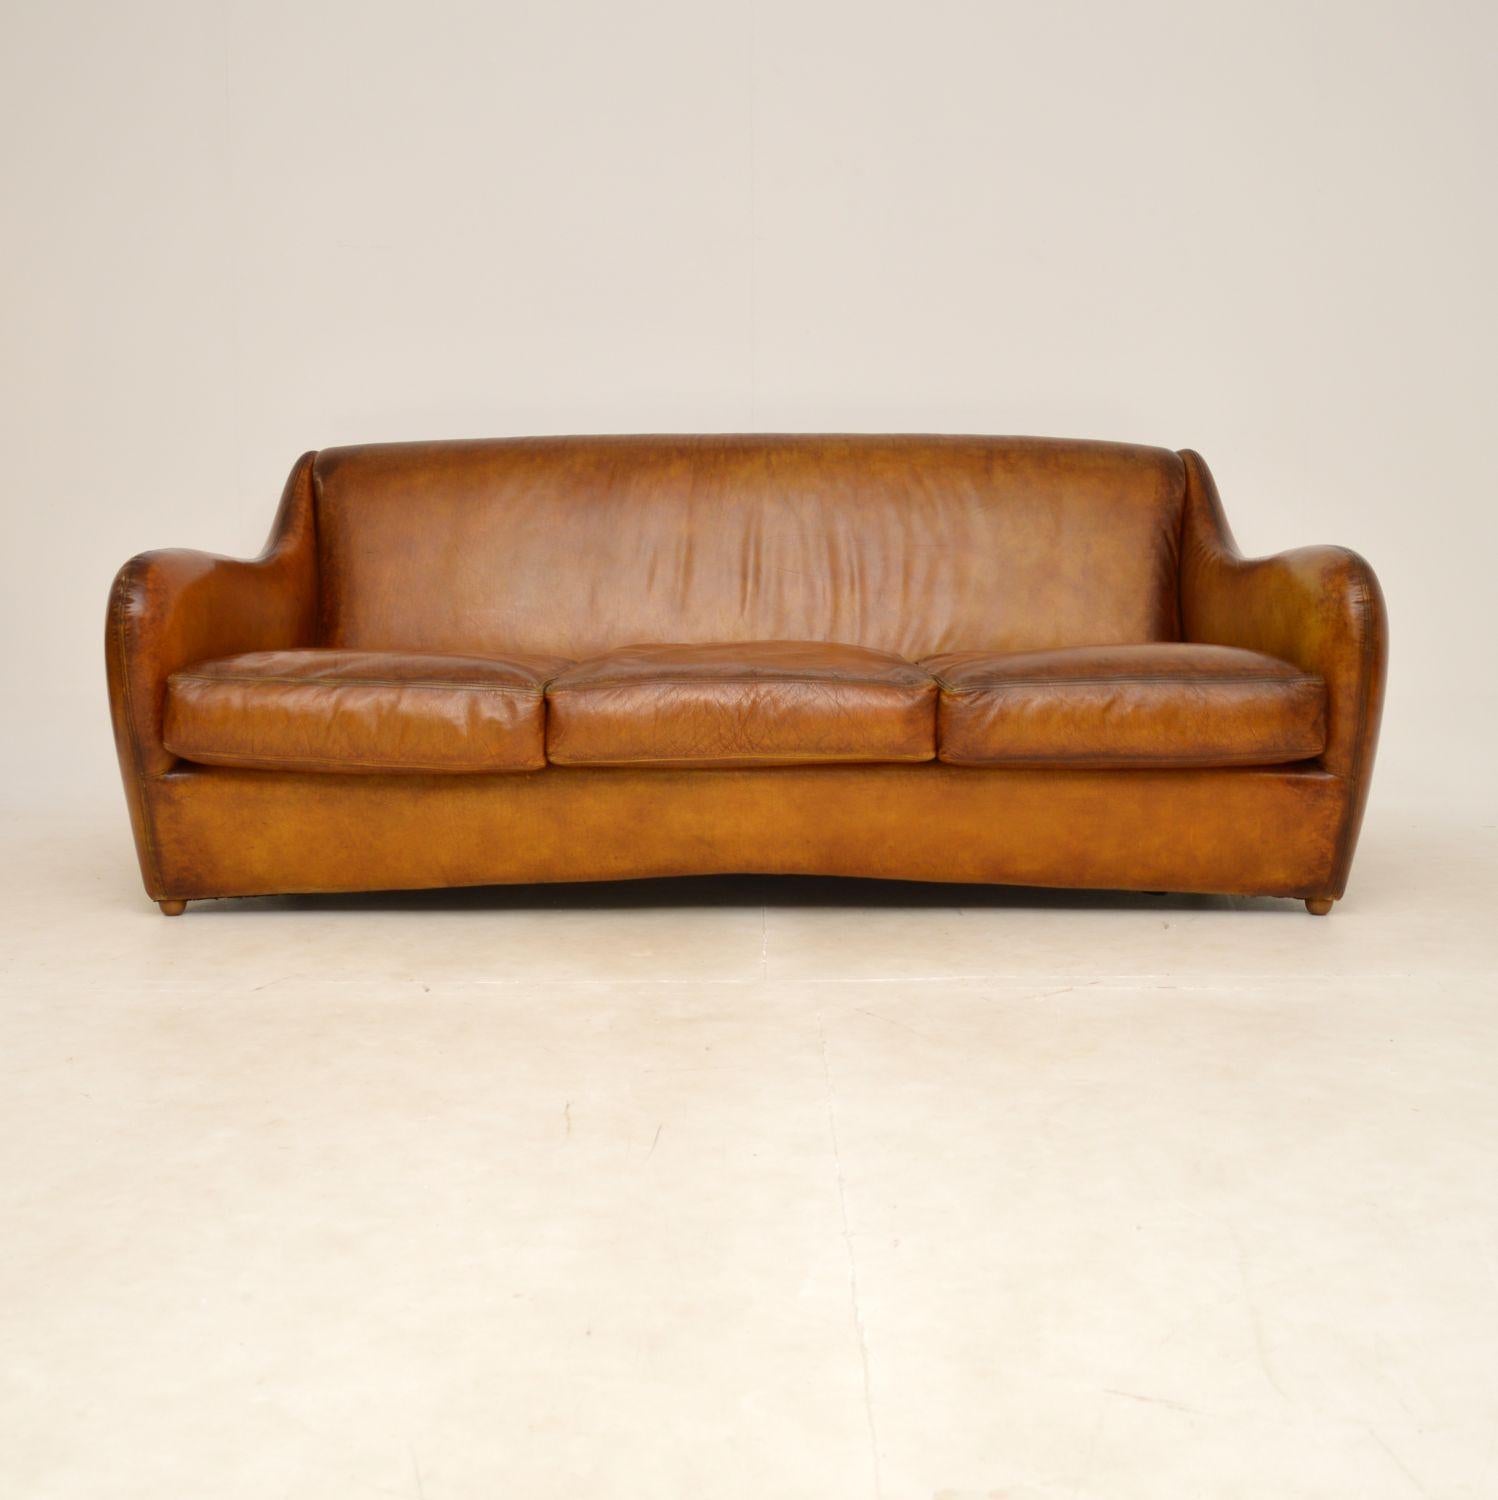 A stunning and iconic vintage leather sofa, this is the ‘Balzac’, designed by Matthew Hilton in 1991 for SCS. This was made in England, it is around 20-30 years old.

The quality is outstanding, this has an absolutely gorgeous design , it is